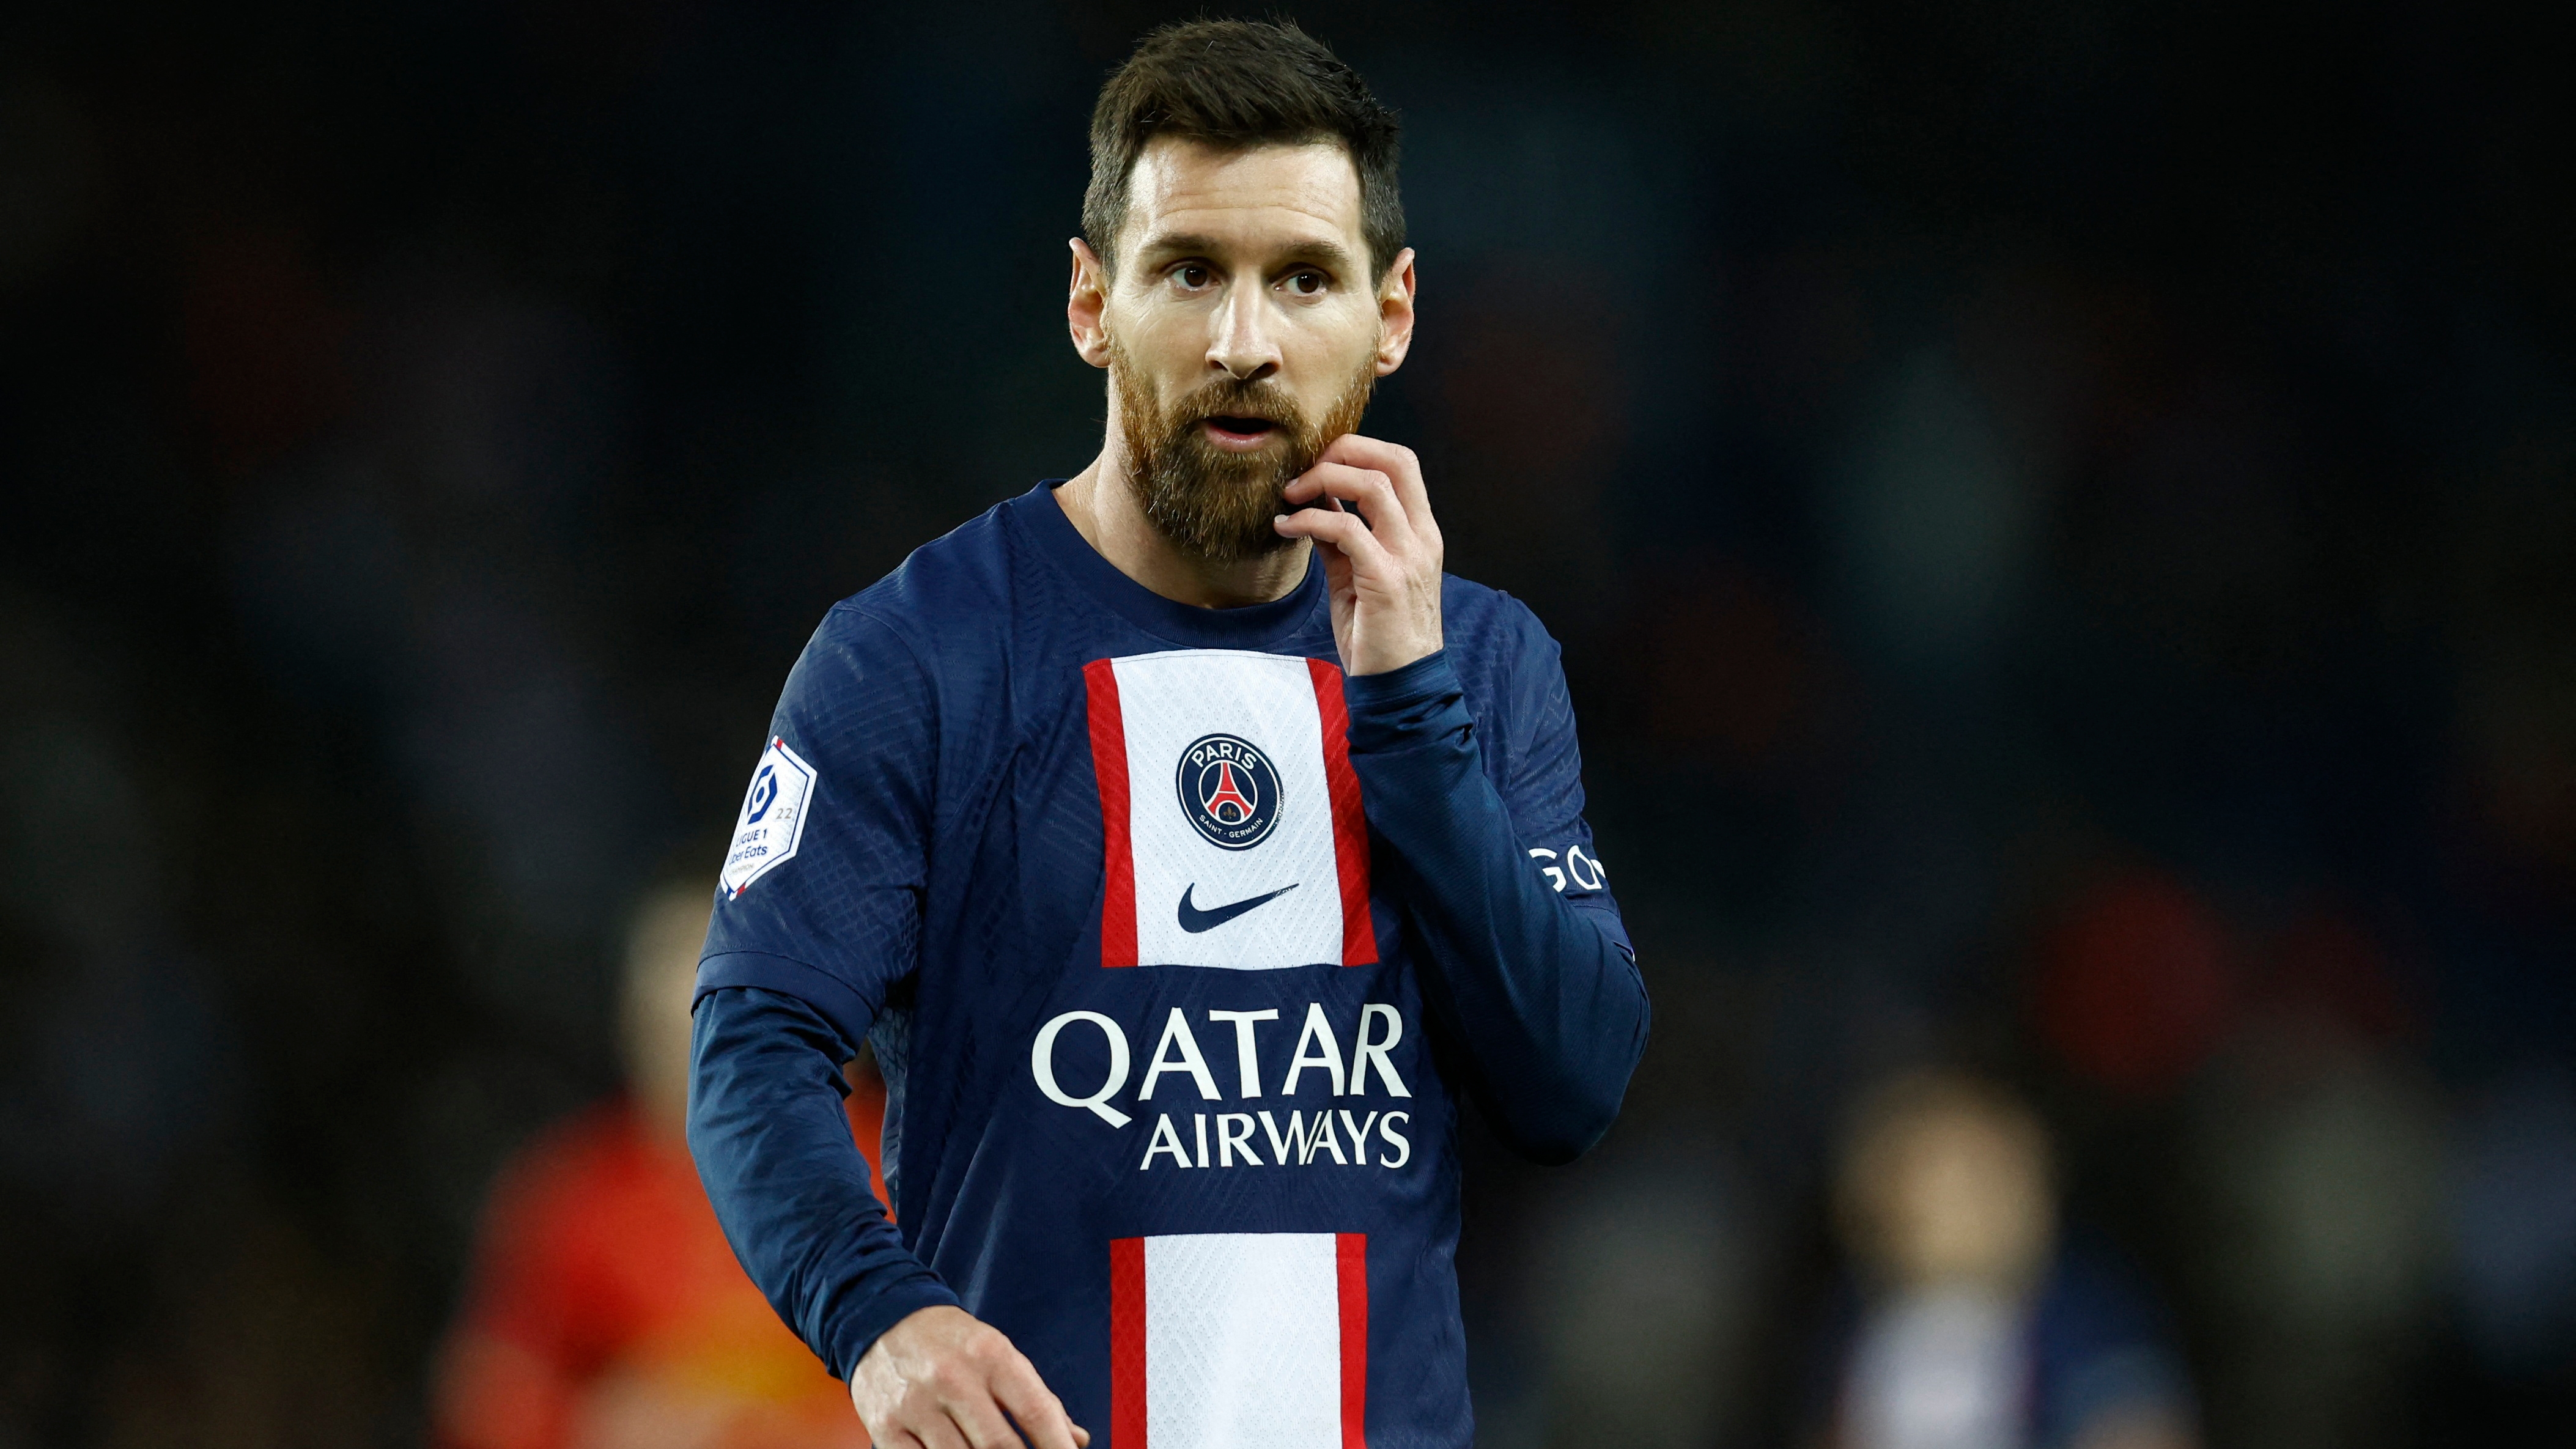 Lionel Messi returned to play for PSG after the World Cup in Qatar 2022 (REUTERS/Gonzalo Fuentes)